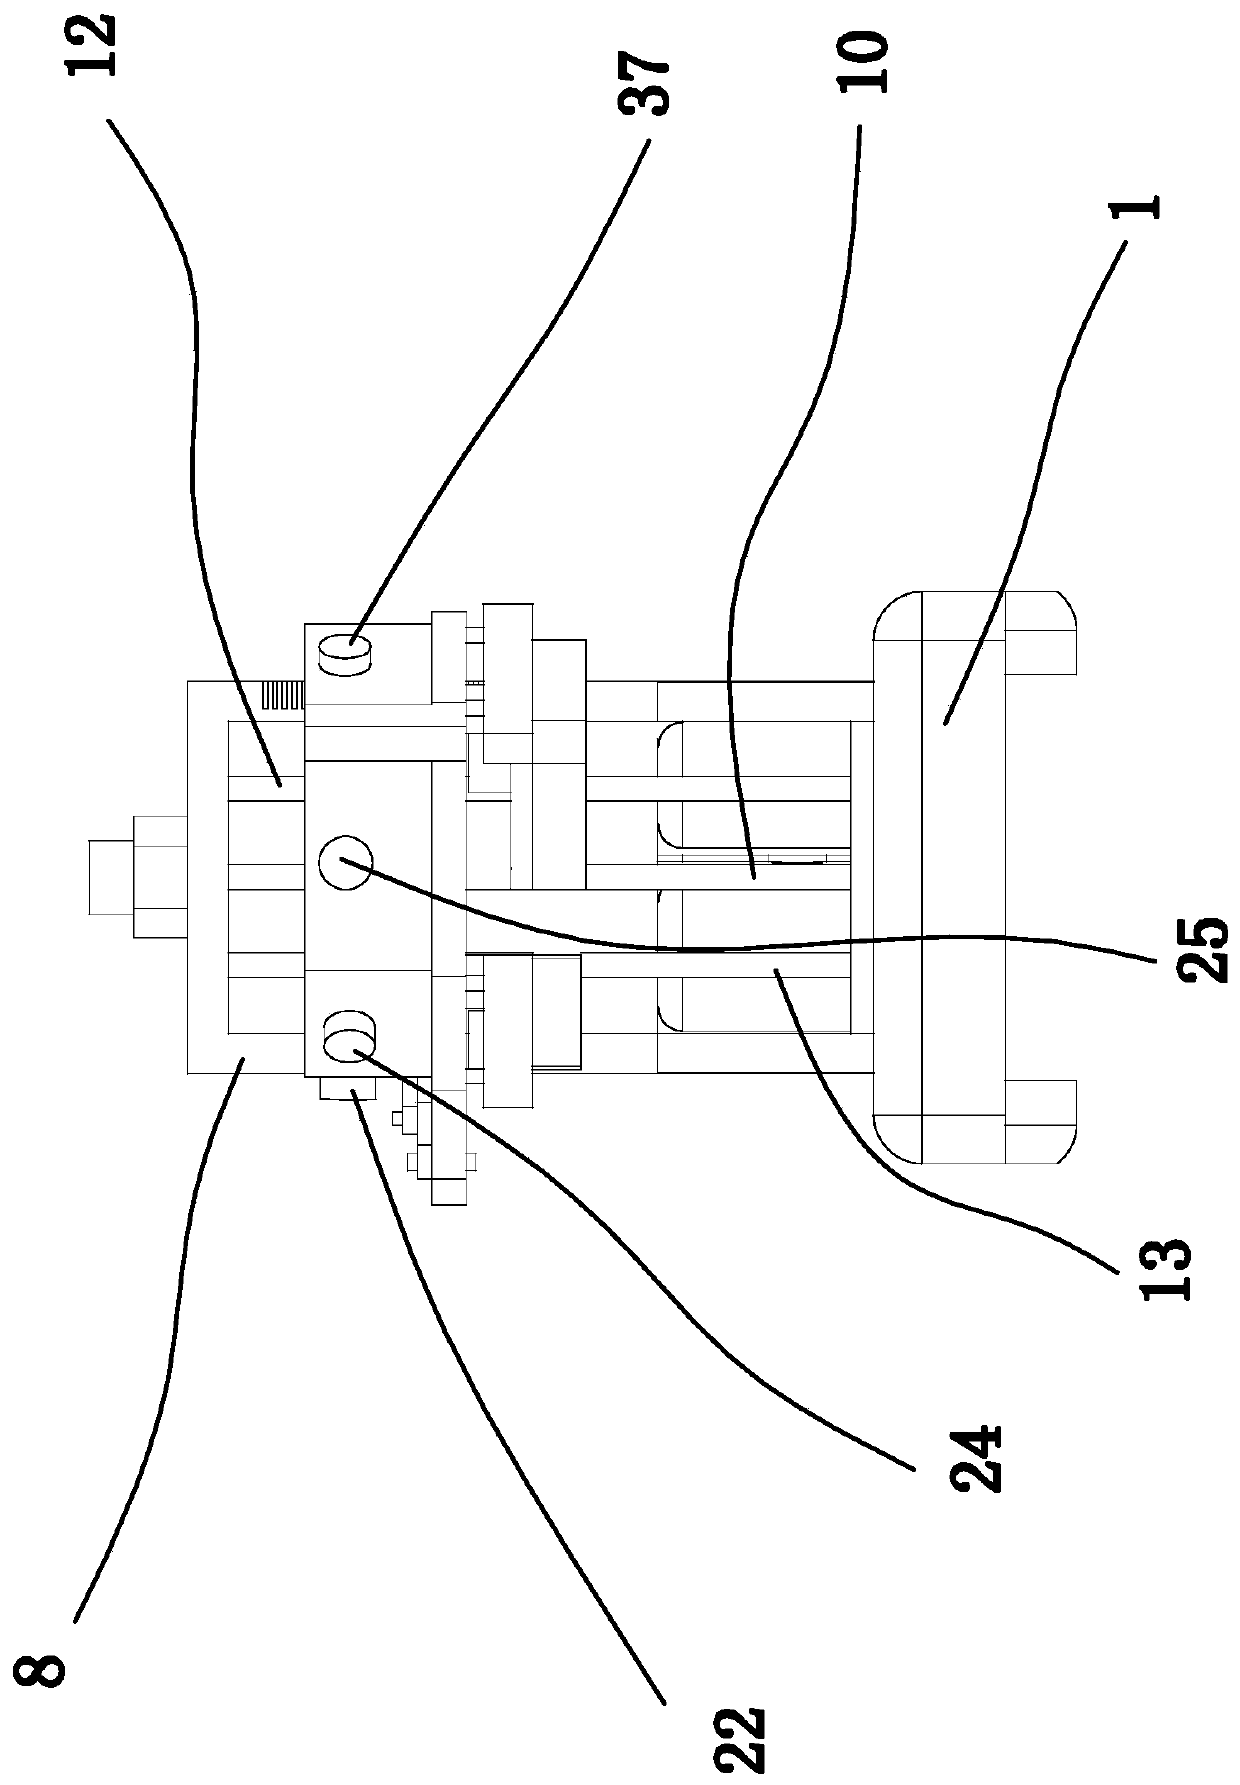 Vertical multi-nozzle tree trunk whitewashing assisting device